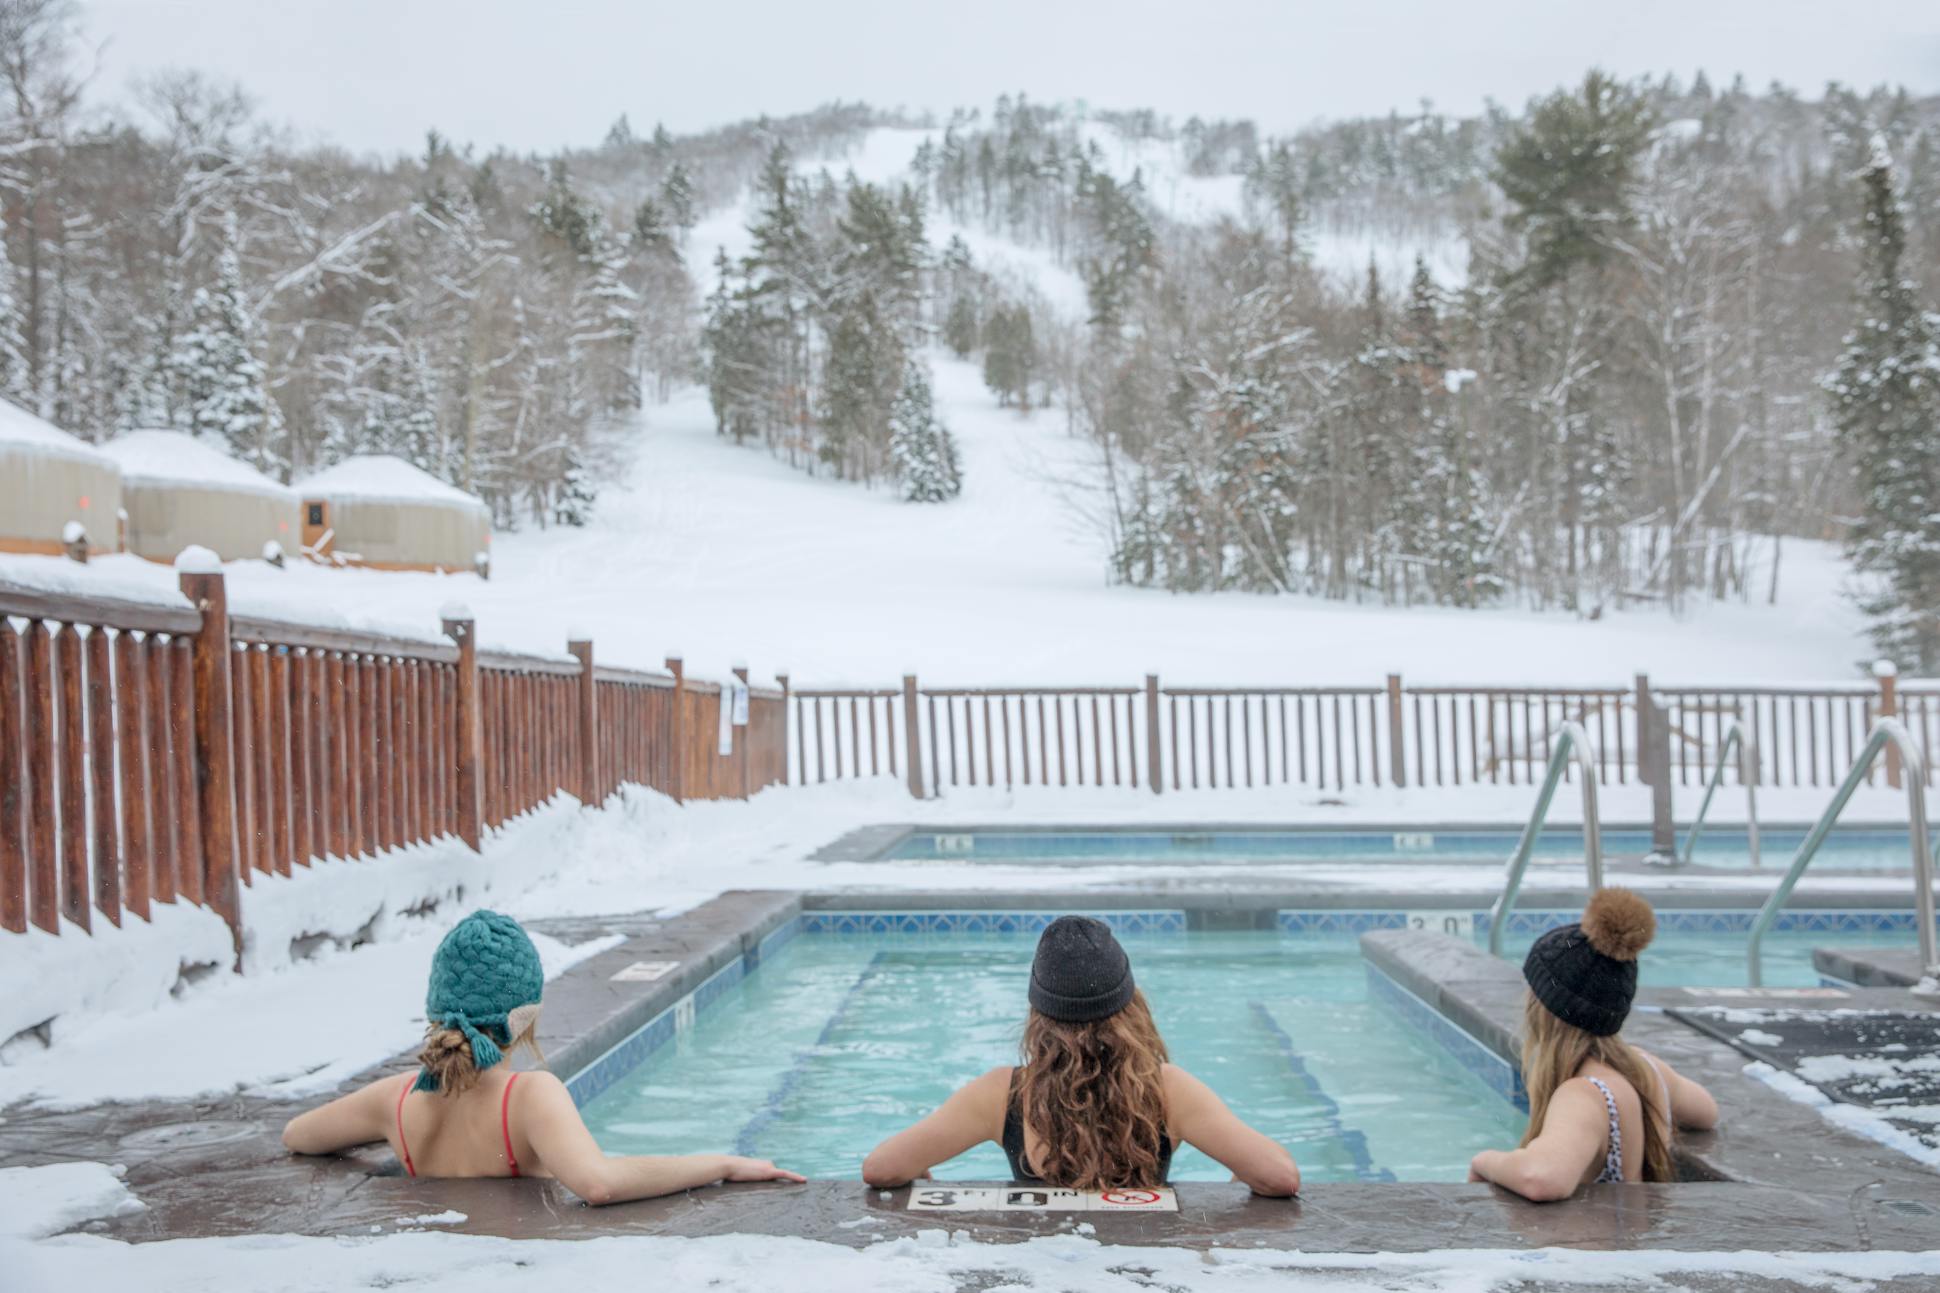 Mount Bohemia’s Nordic spa features the largest outdoor hot tub on Michigan’s Upper Peninsula.